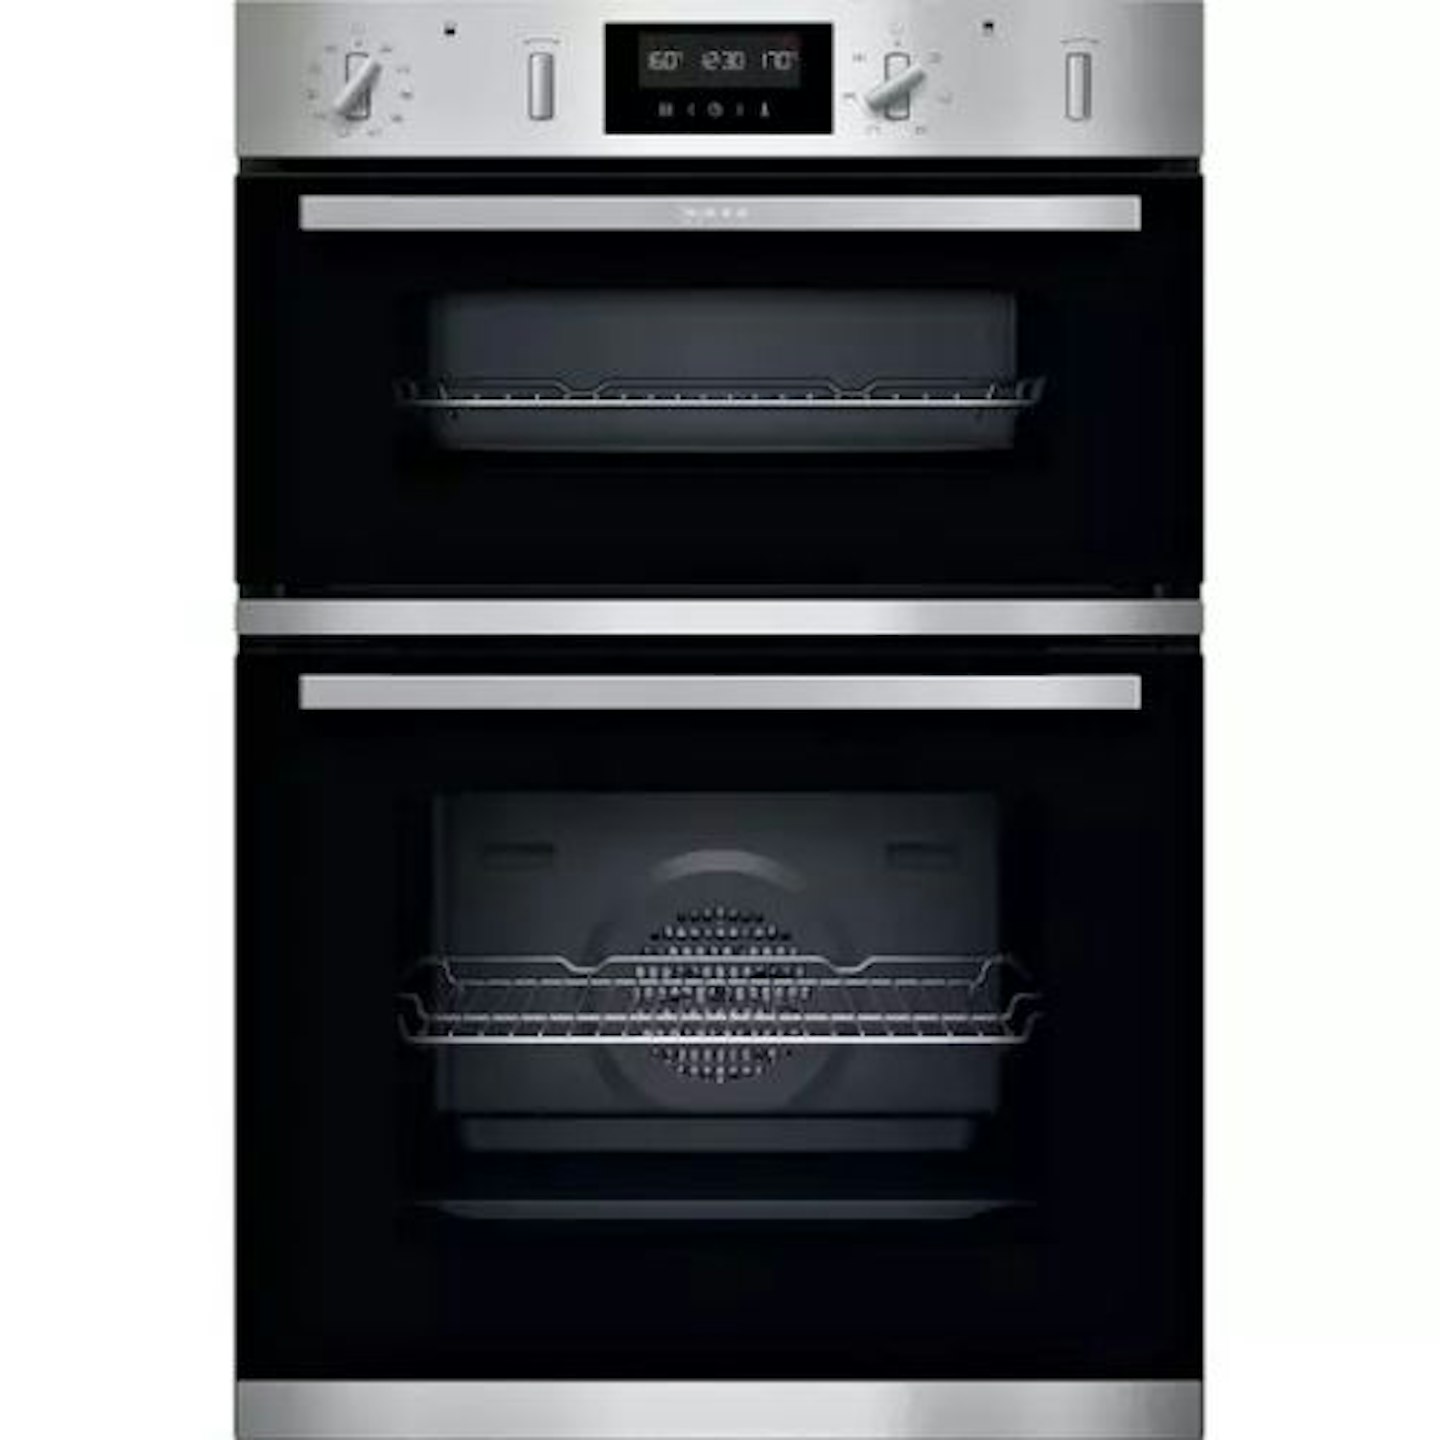 https://images.bauerhosting.com/affiliates/sites/10/2023/08/NEFF-N50-U2GCH7AN0B-Electric-Double-Pyrolytic-Oven-Stainless-Steel.jpg?auto=format&w=1440&q=80